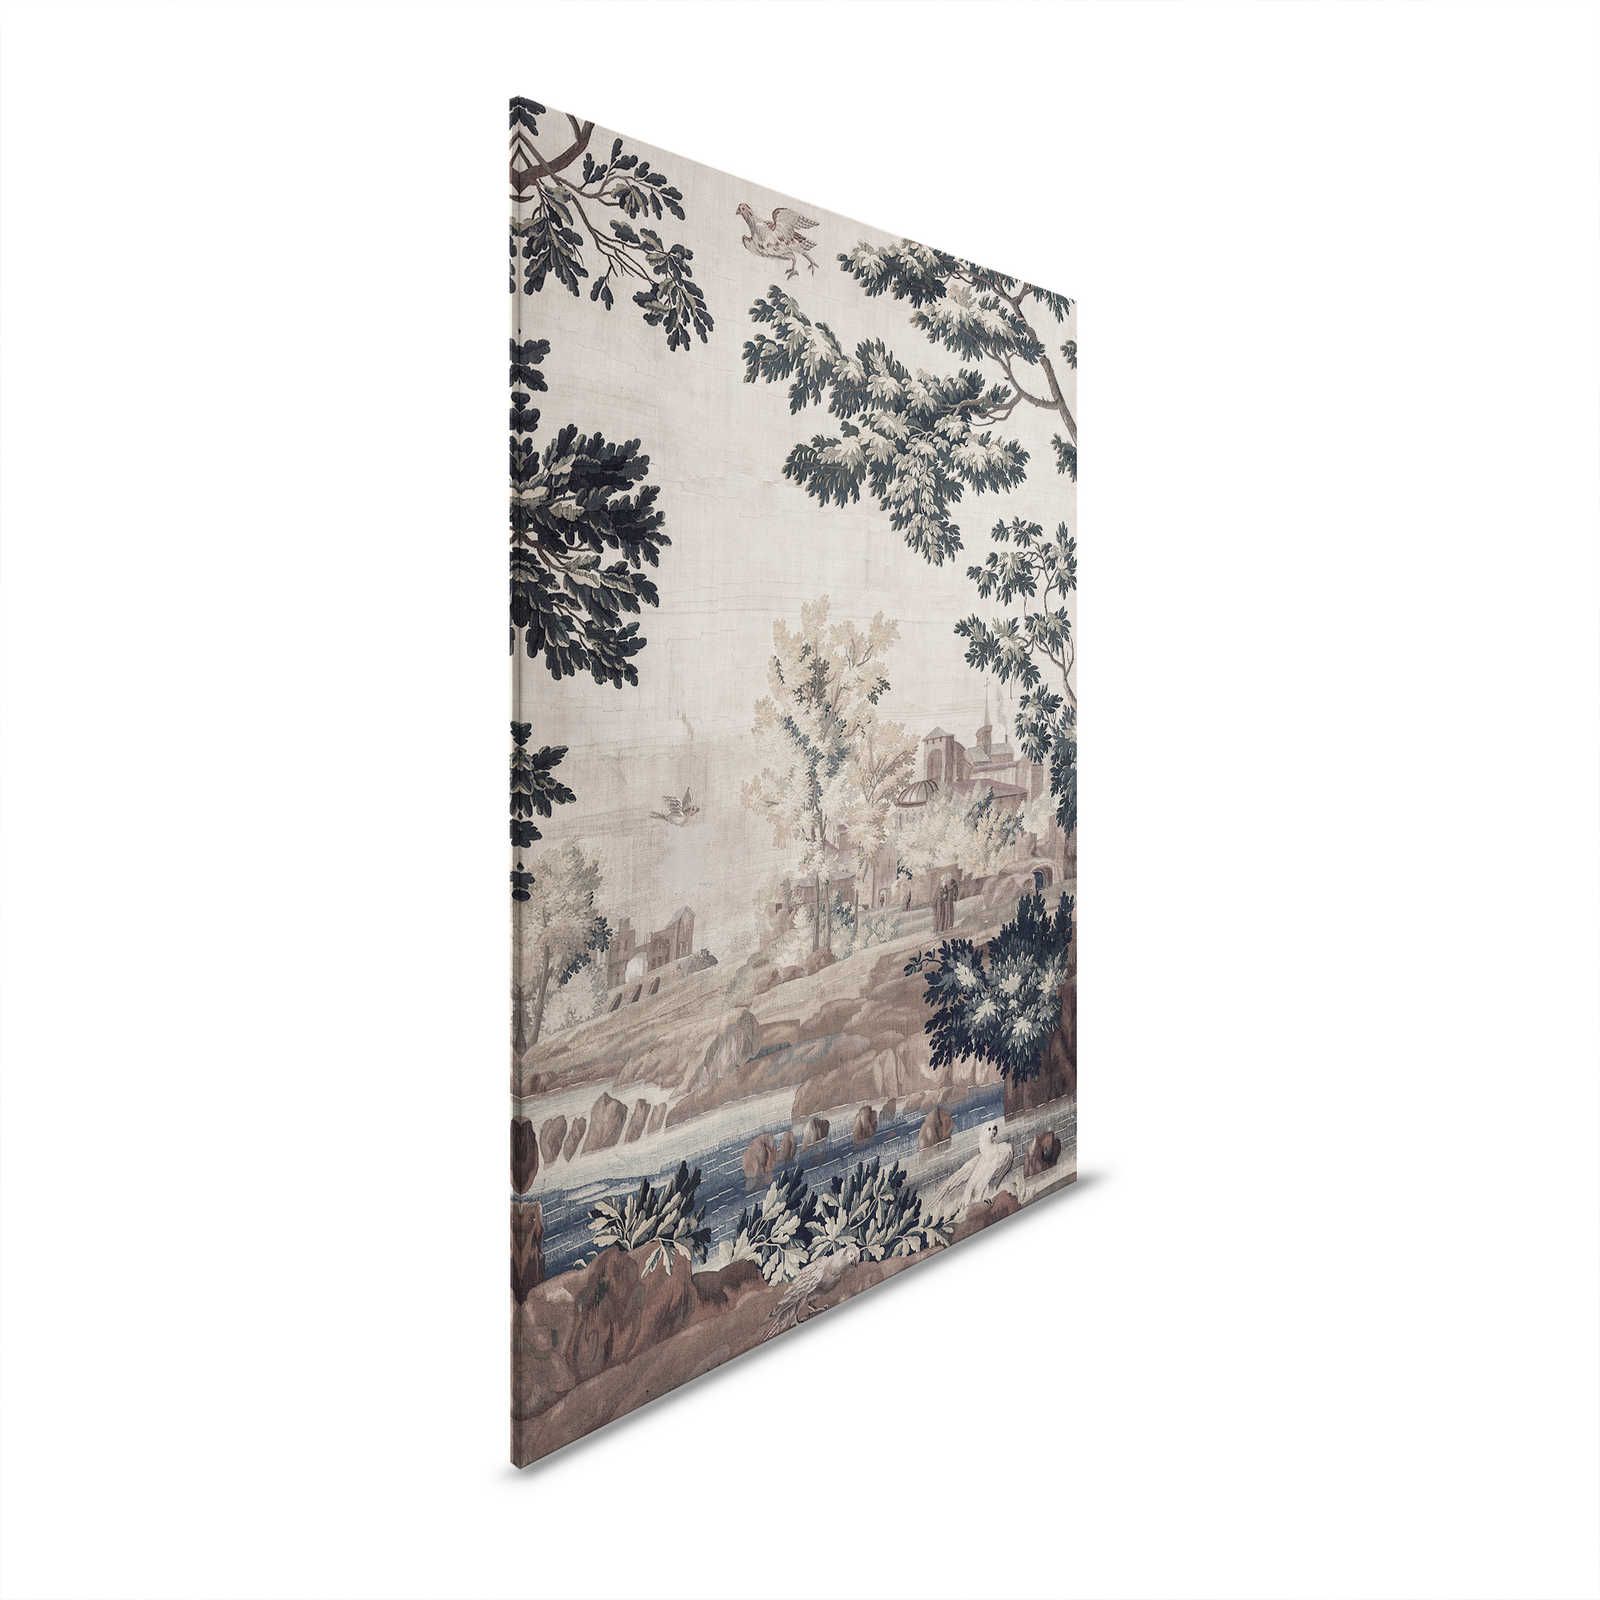 Tapestry Gallery 1 - Landscape canvas picture historical tapestry - 0.90 m x 0.60 m
